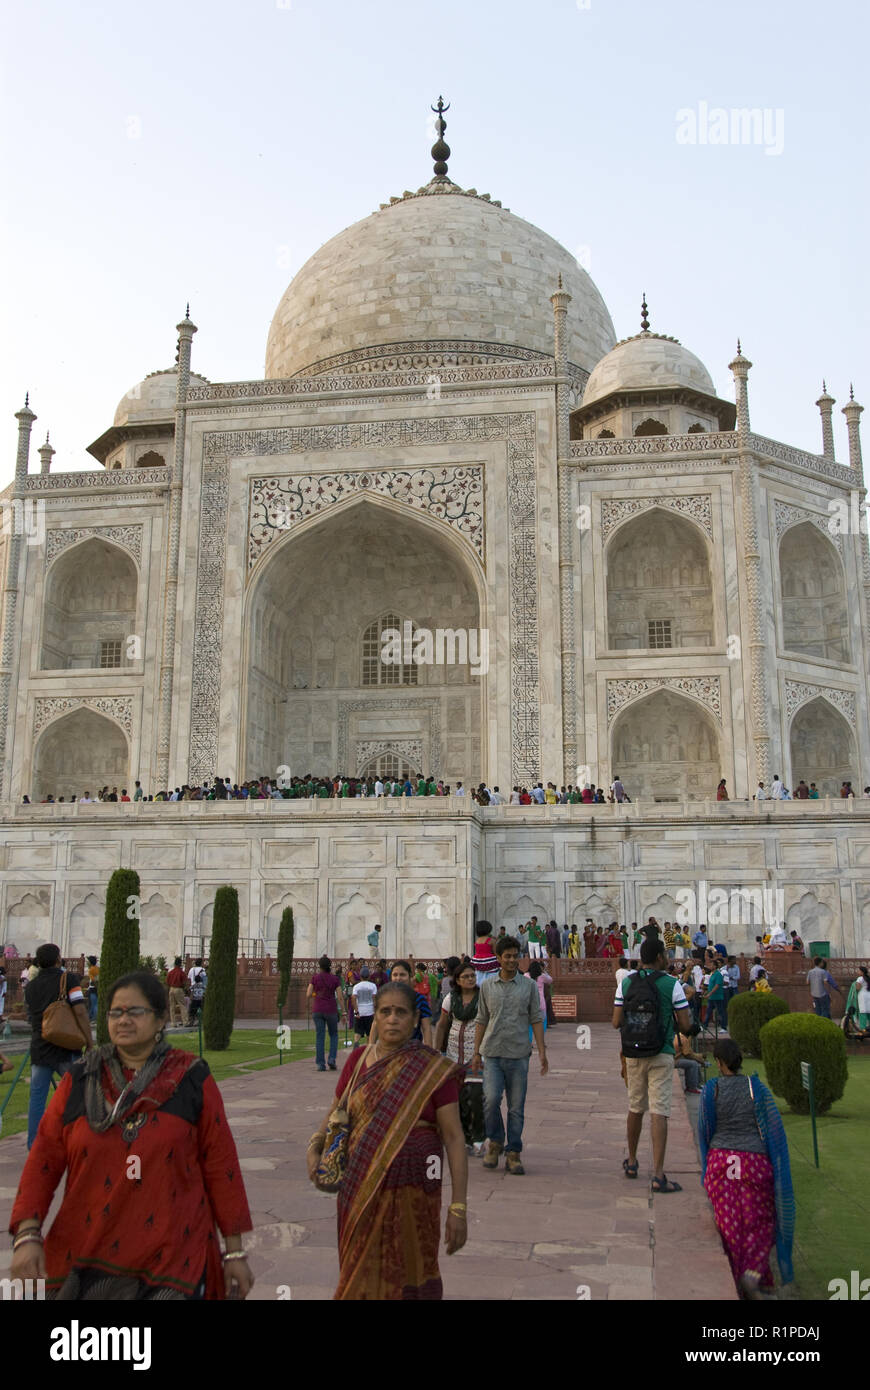 Indians visit the Taj Mahal, a white marble mausoleum in Agra, India built by Mughal emperor Shah Jahan in memory of his wife, Mumtaz Mahal. Stock Photo